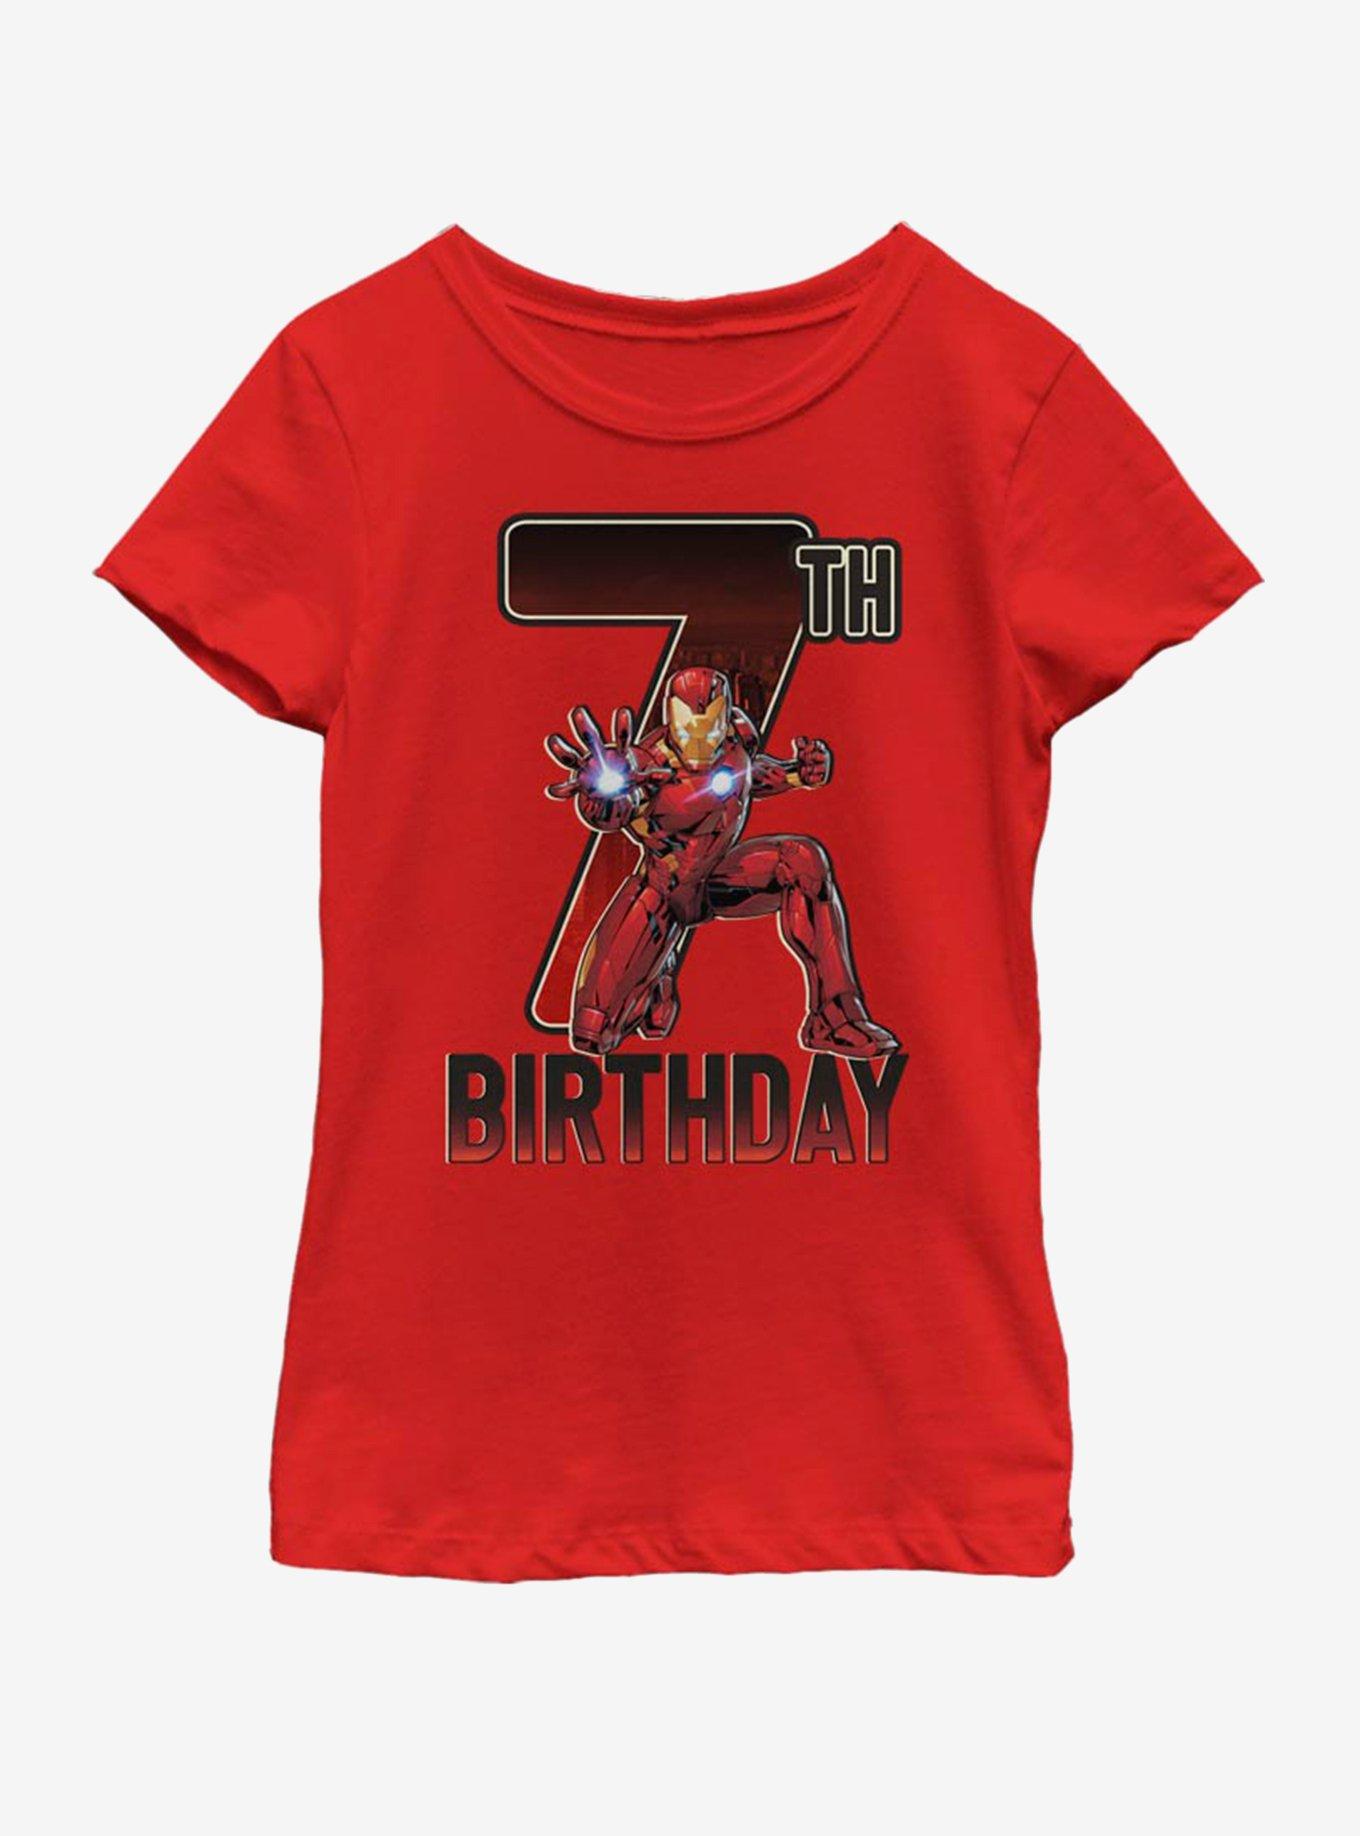 Marvel Ironman 7th Bday Youth Girls T-Shirt, RED, hi-res